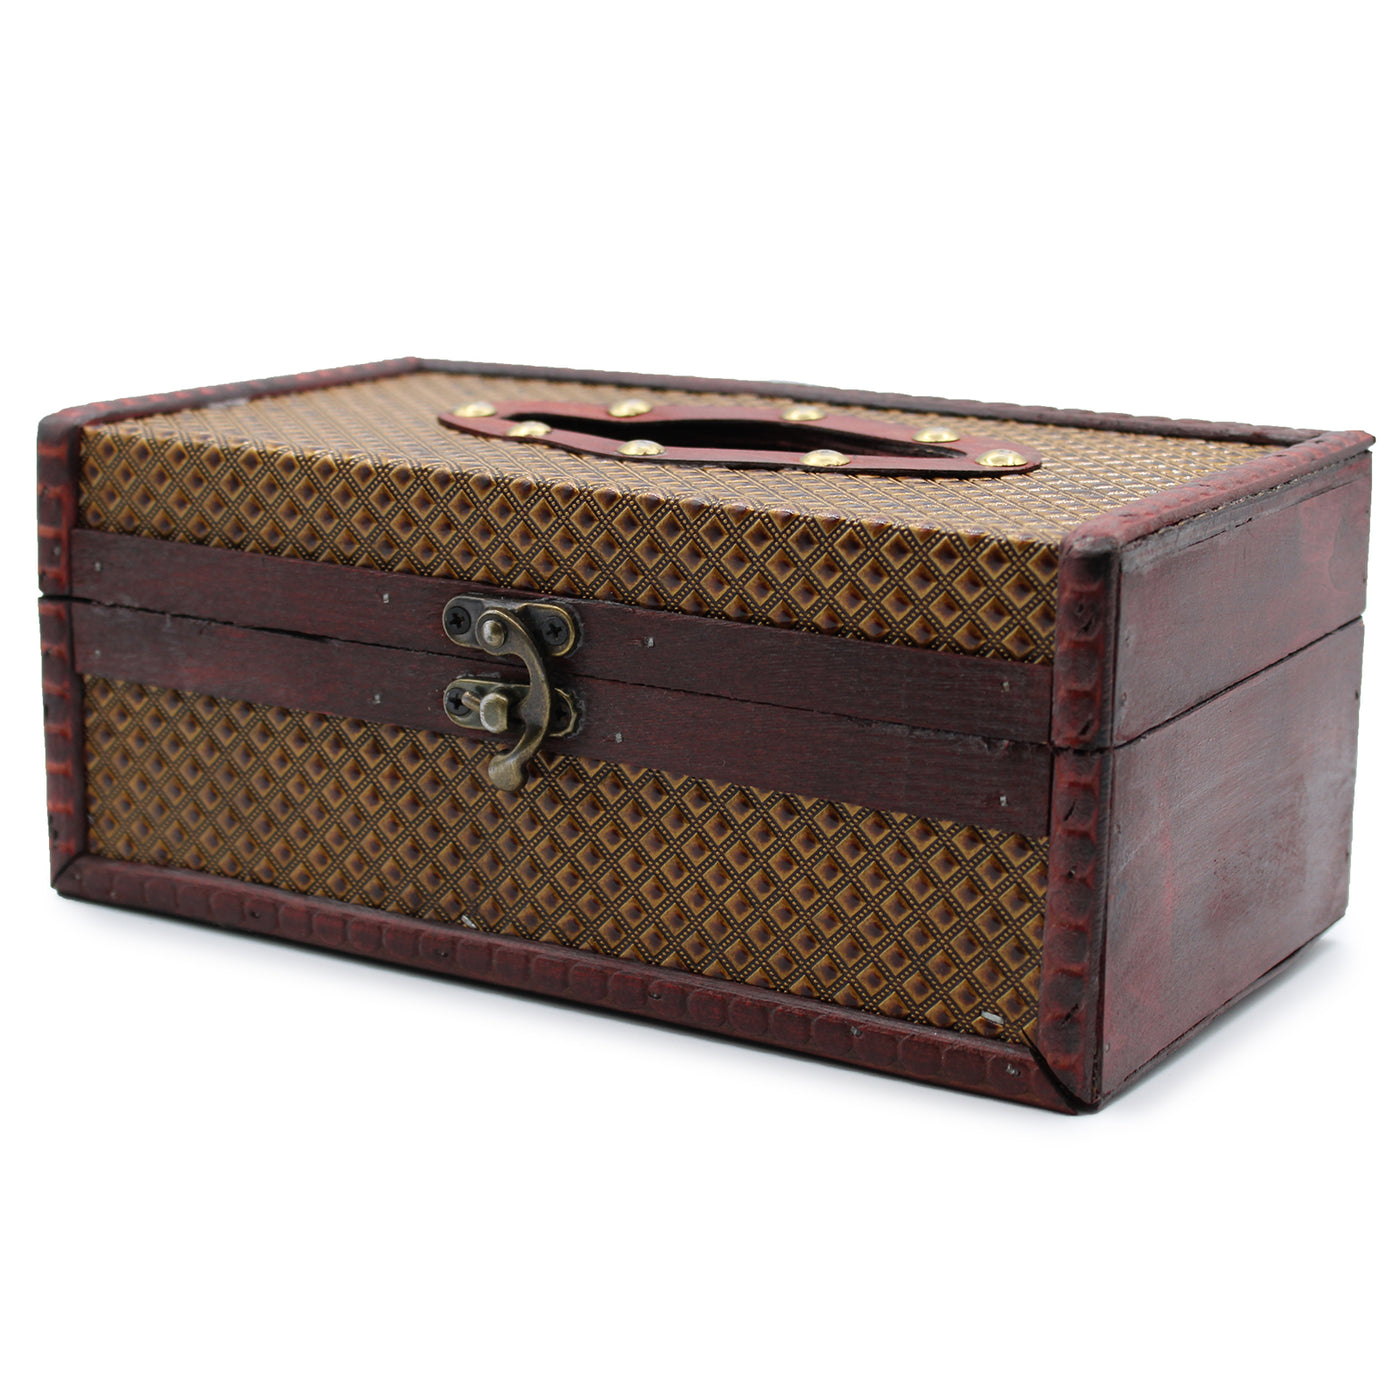 Large Antique Look Colonial Trunk Style Tissue Box.